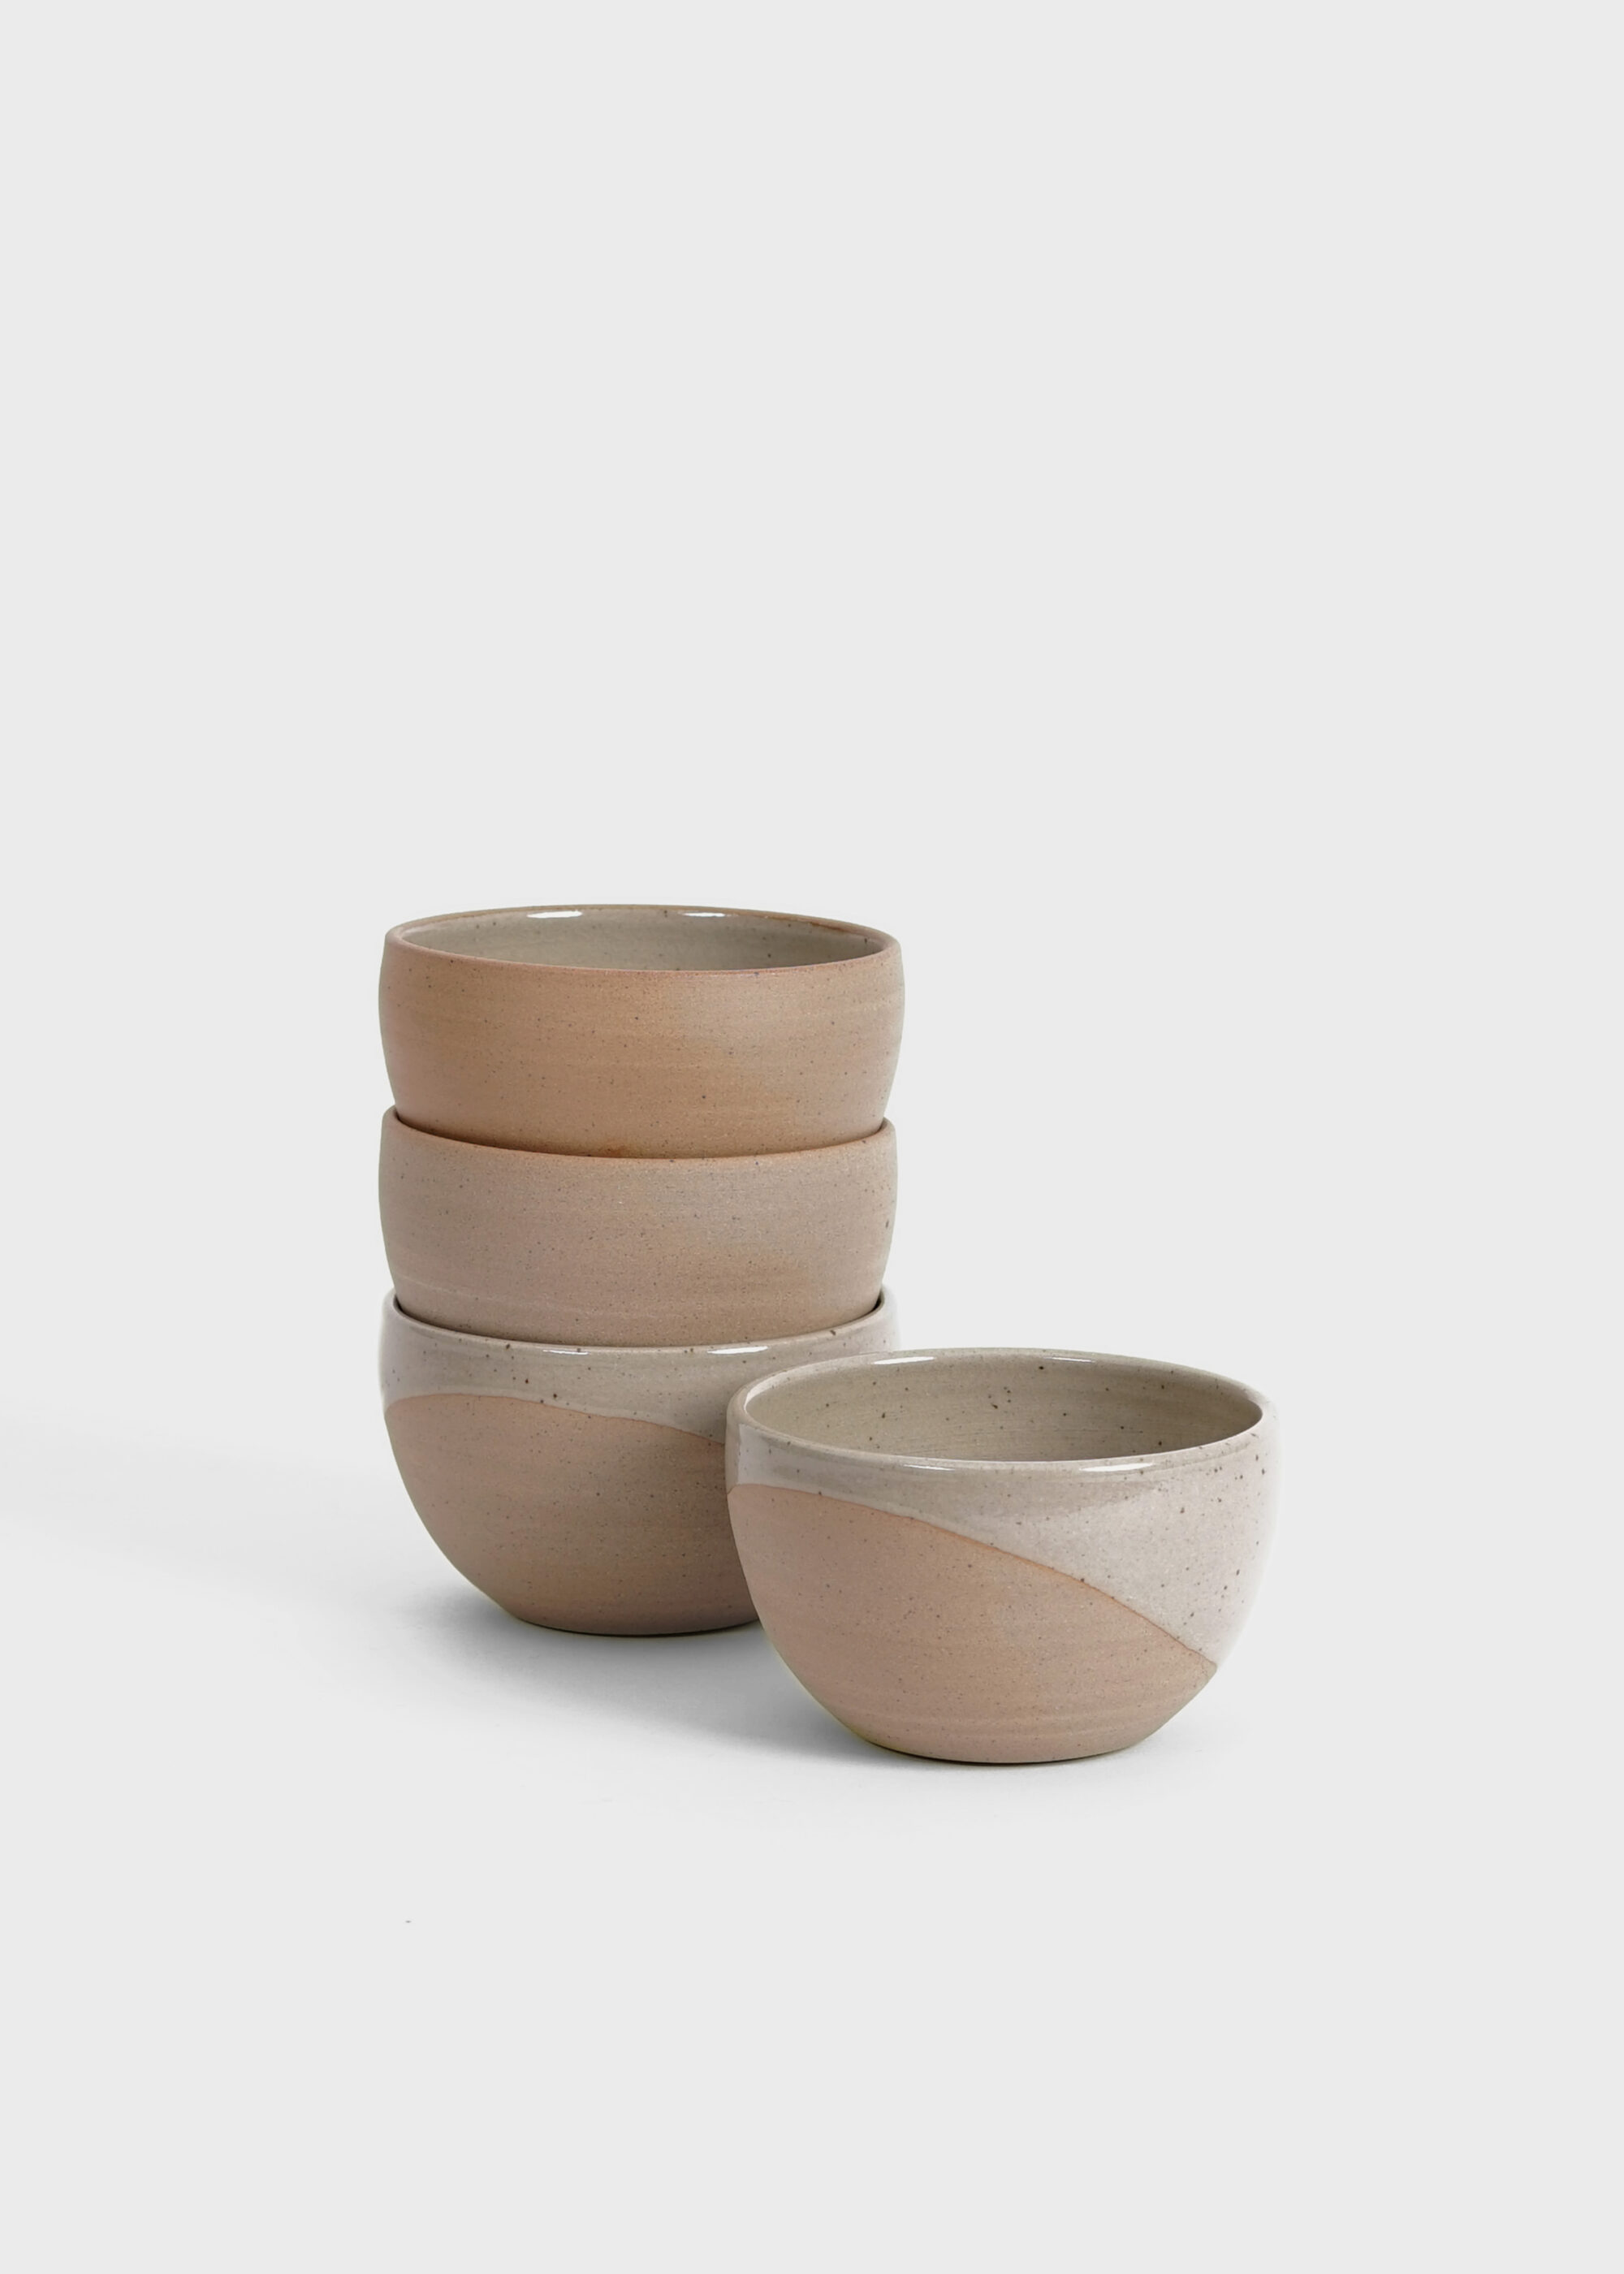 Product image for »Lichen & Beuys« Tea-Coffee Ceramic Bowl Set of 4